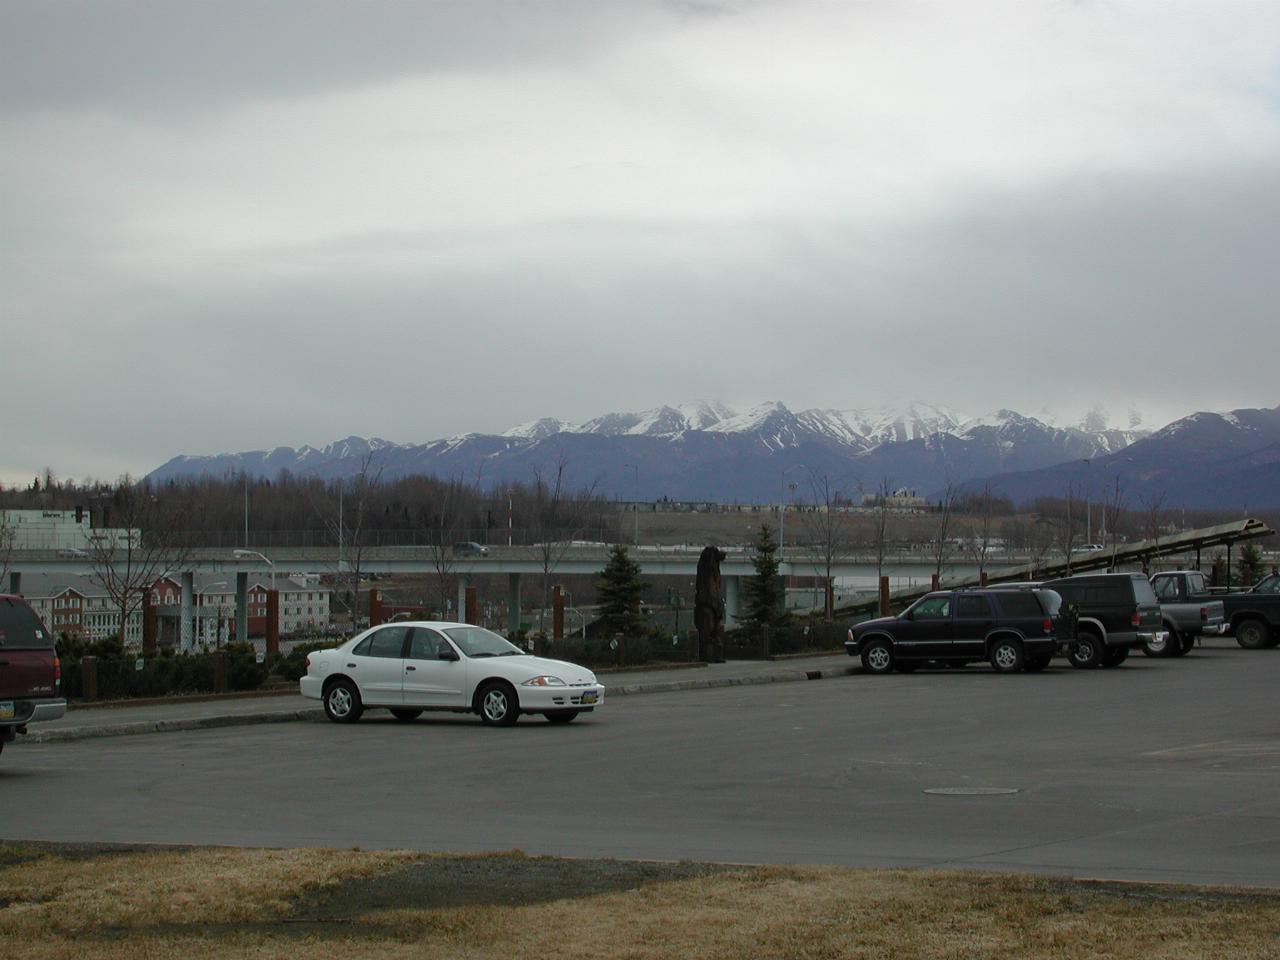 Looking north in Anchorage